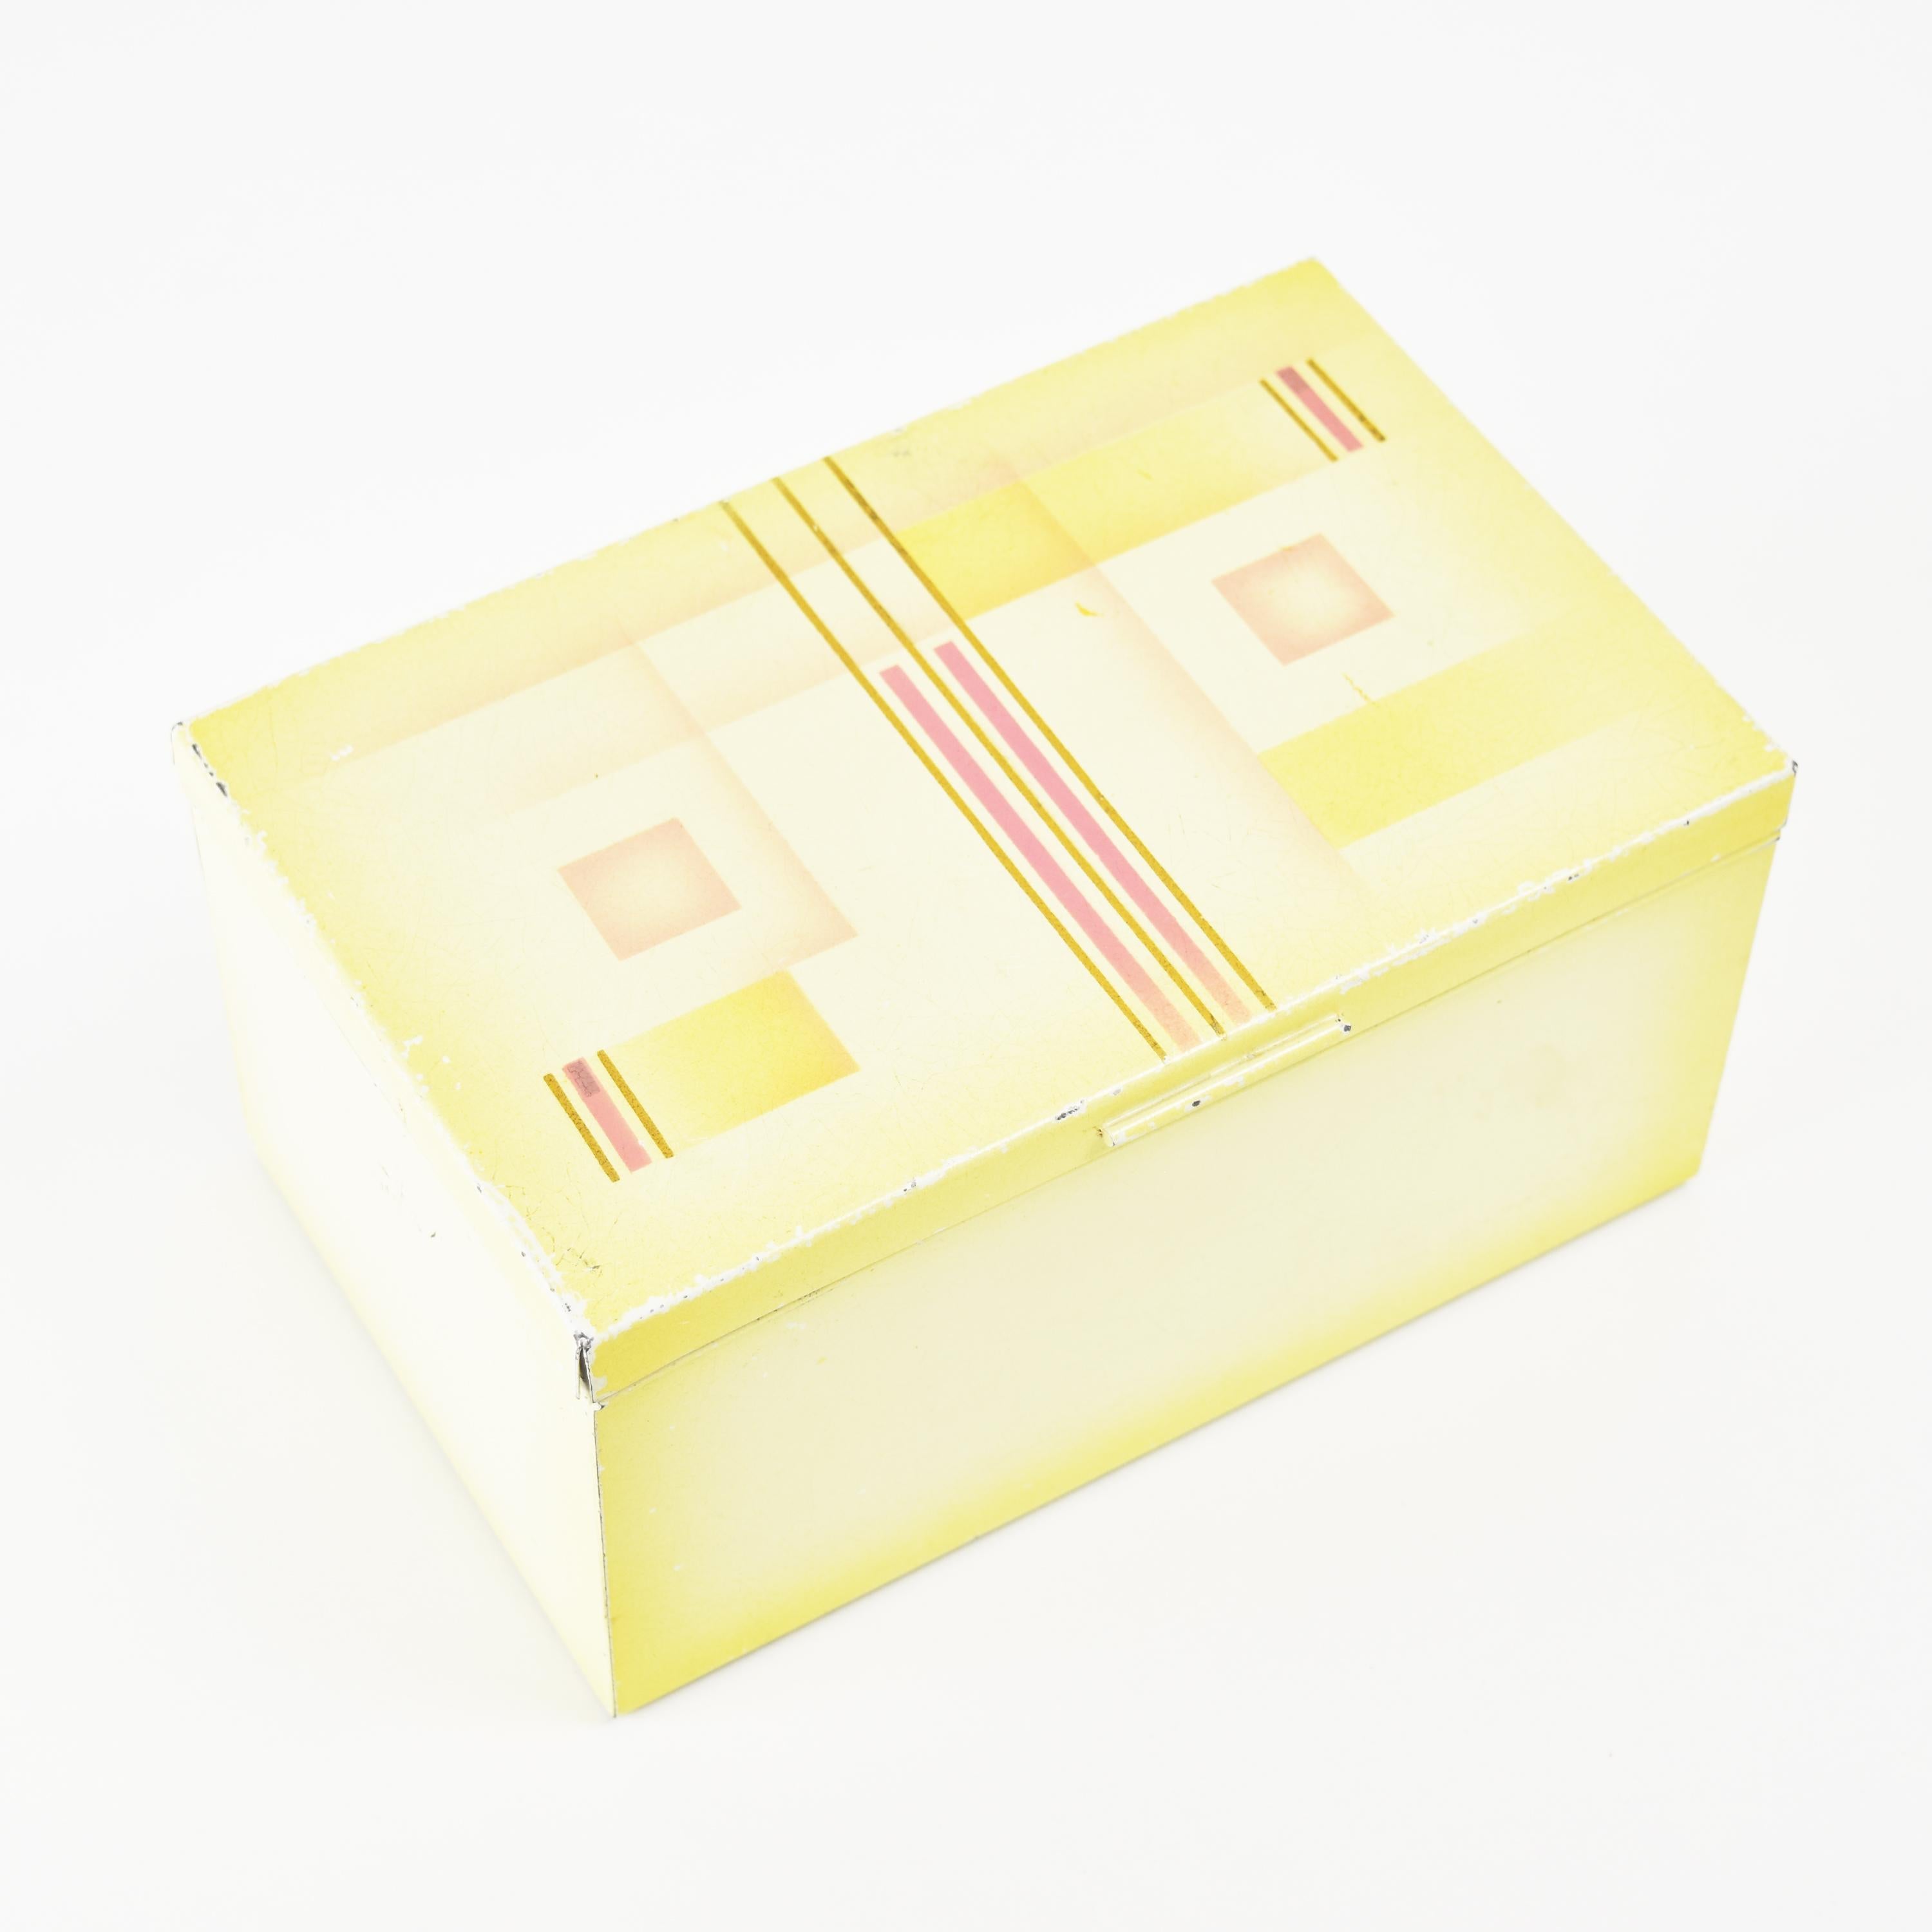 Extraordinary Modernist piece of early 20th Century design! This box or container with a hinged lid  is lacquered with a fabulous typically constructivist 